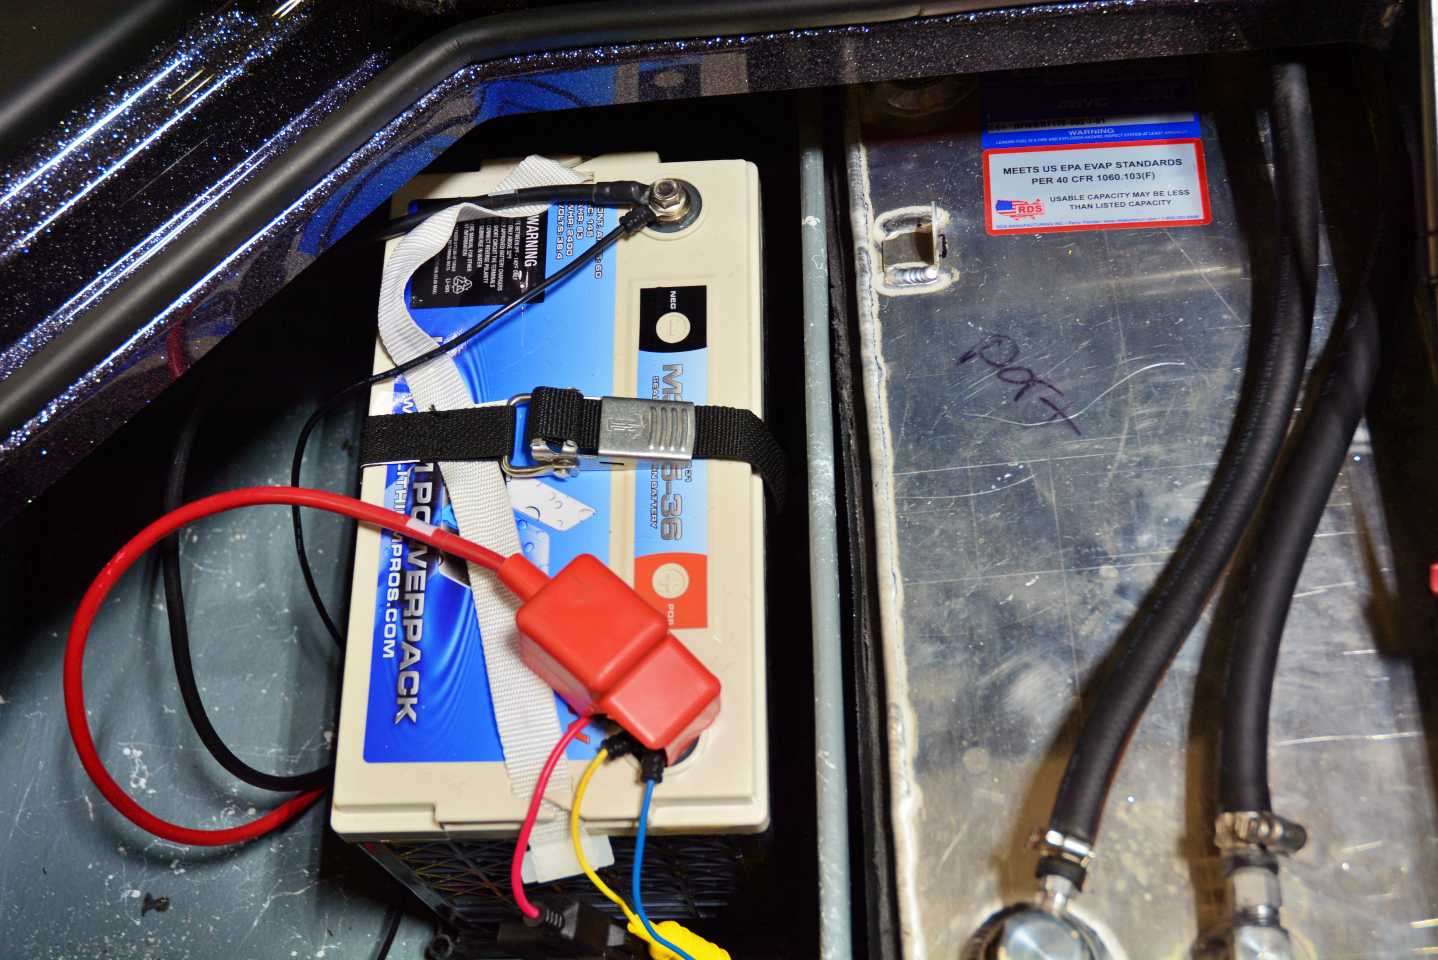 In the port battery compartment is a Lithium Pros 36-volt battery with 36 volts and 65-amp hours. 
